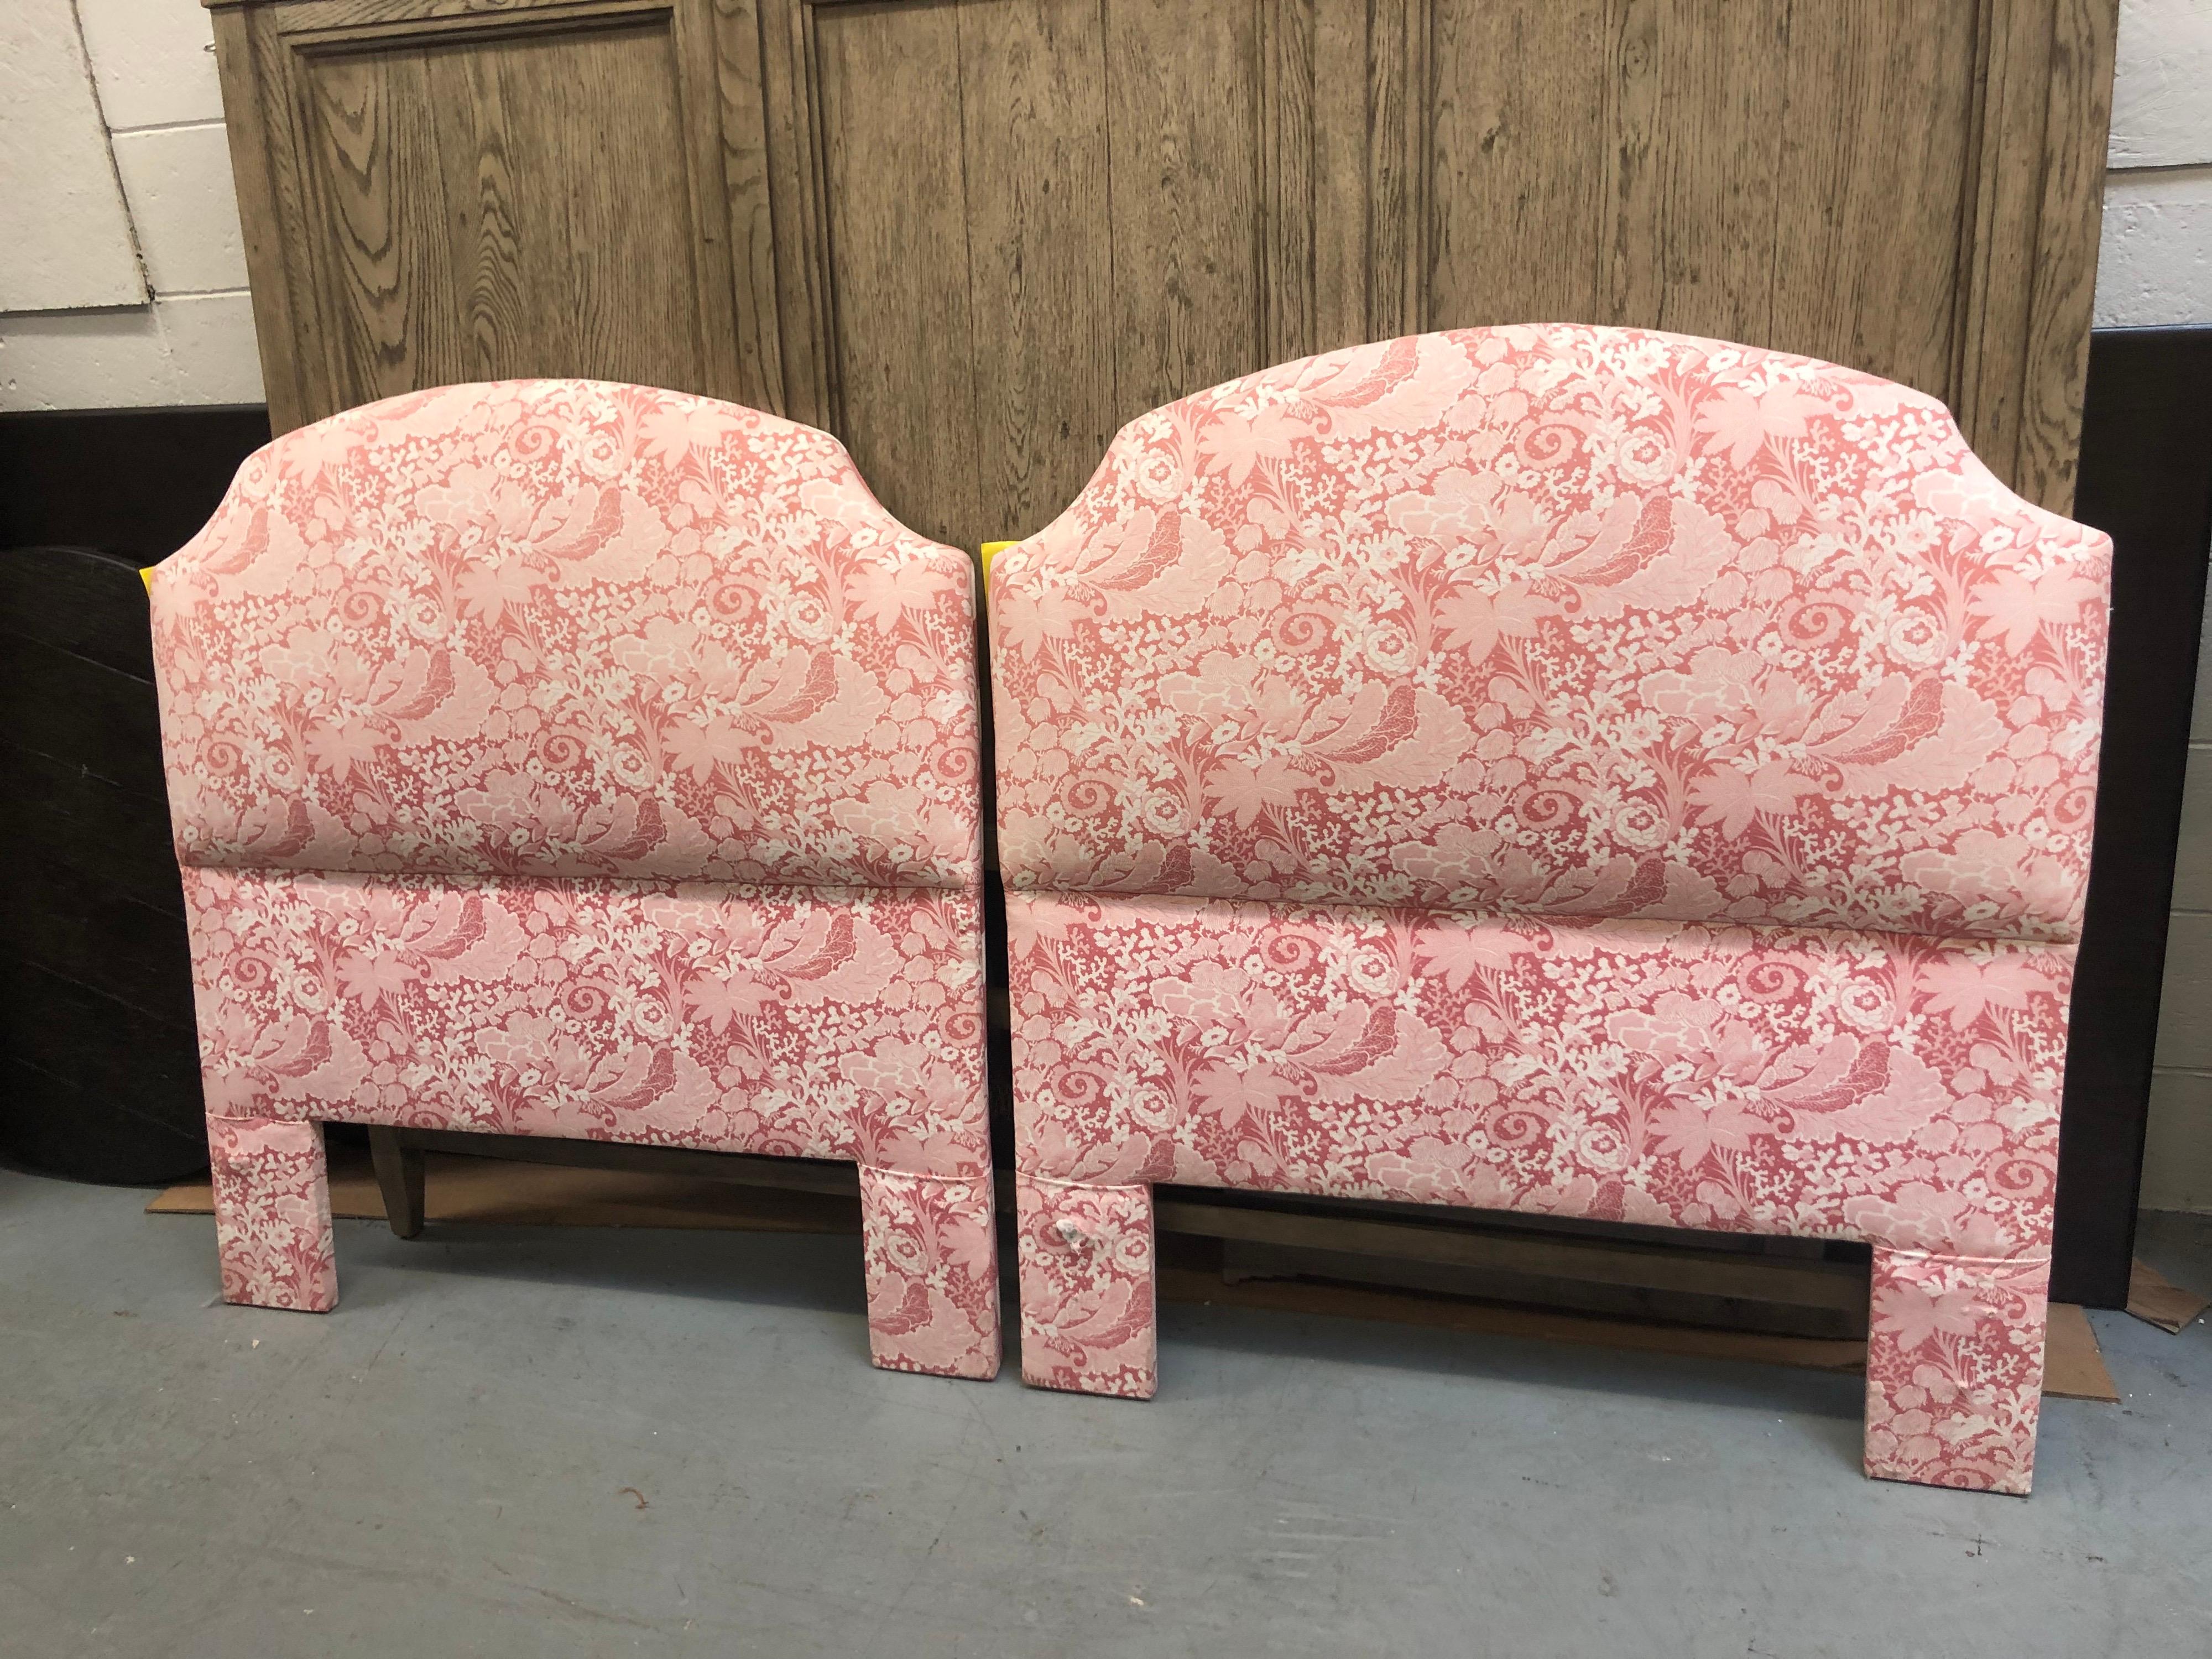 Pair of palm beach Regency twin headboards. Pretty in pink. Perfect for twin girls or a guest bedroom. In very good condition. Ready to use. No need for reupholstery.